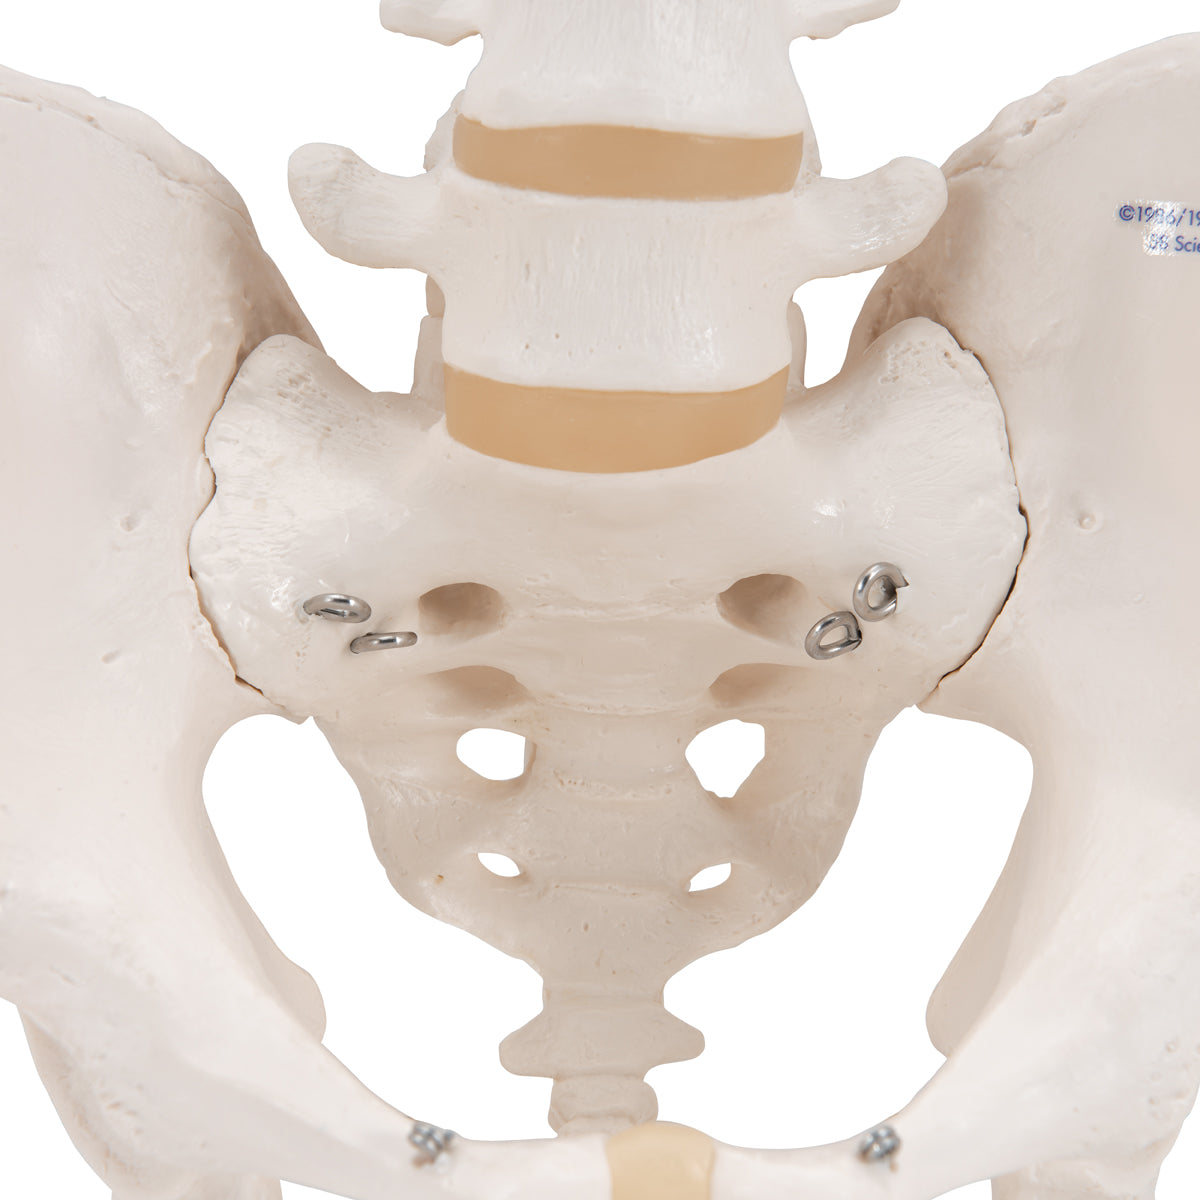 Pelvic model showing bones and joints in the man's pelvis